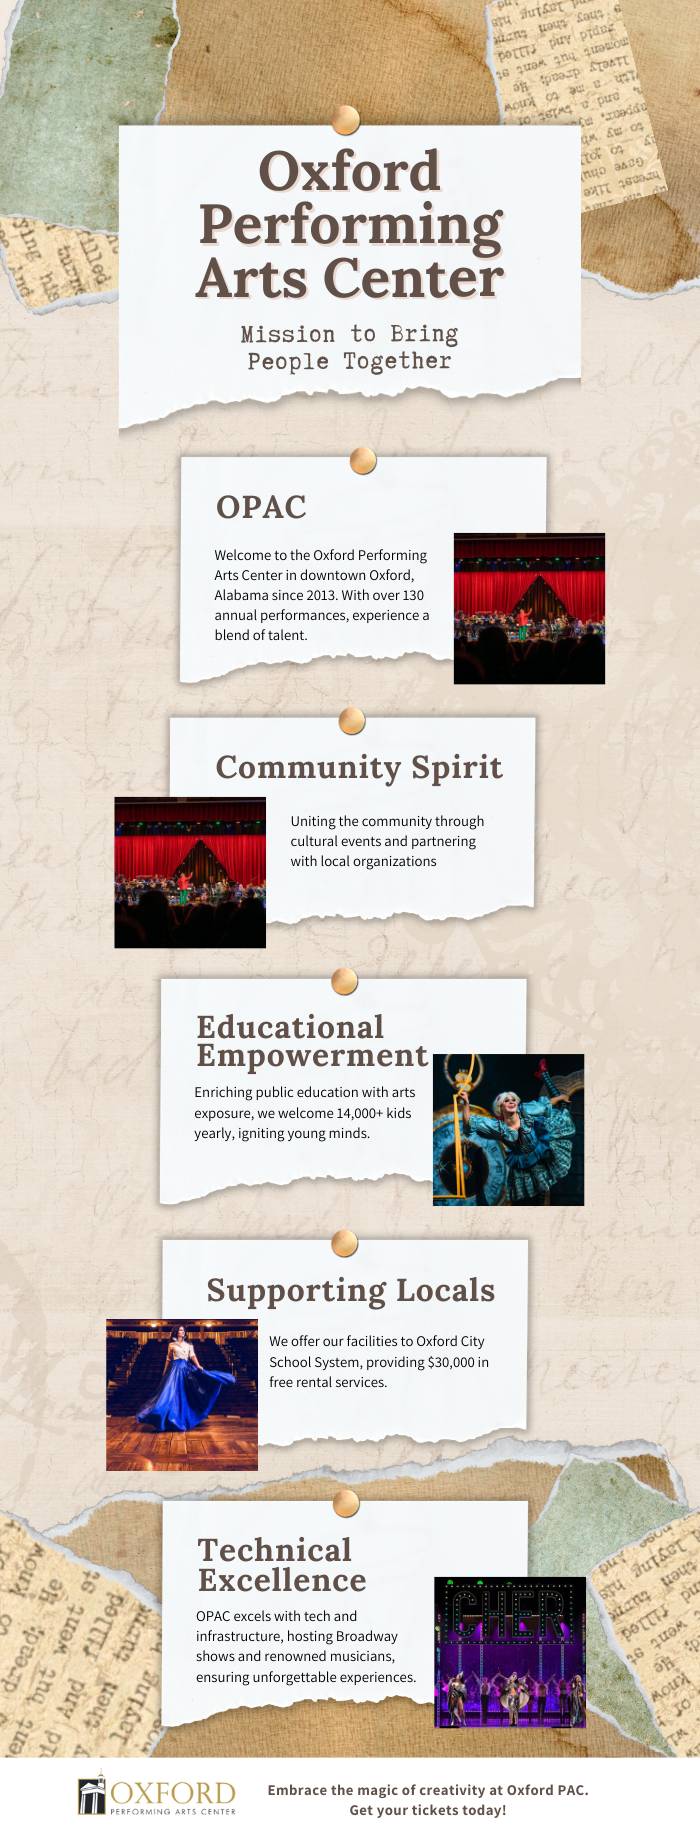 M42532 - Infographic - Oxford Performing Arts Center's Mission to Bring People Together.png